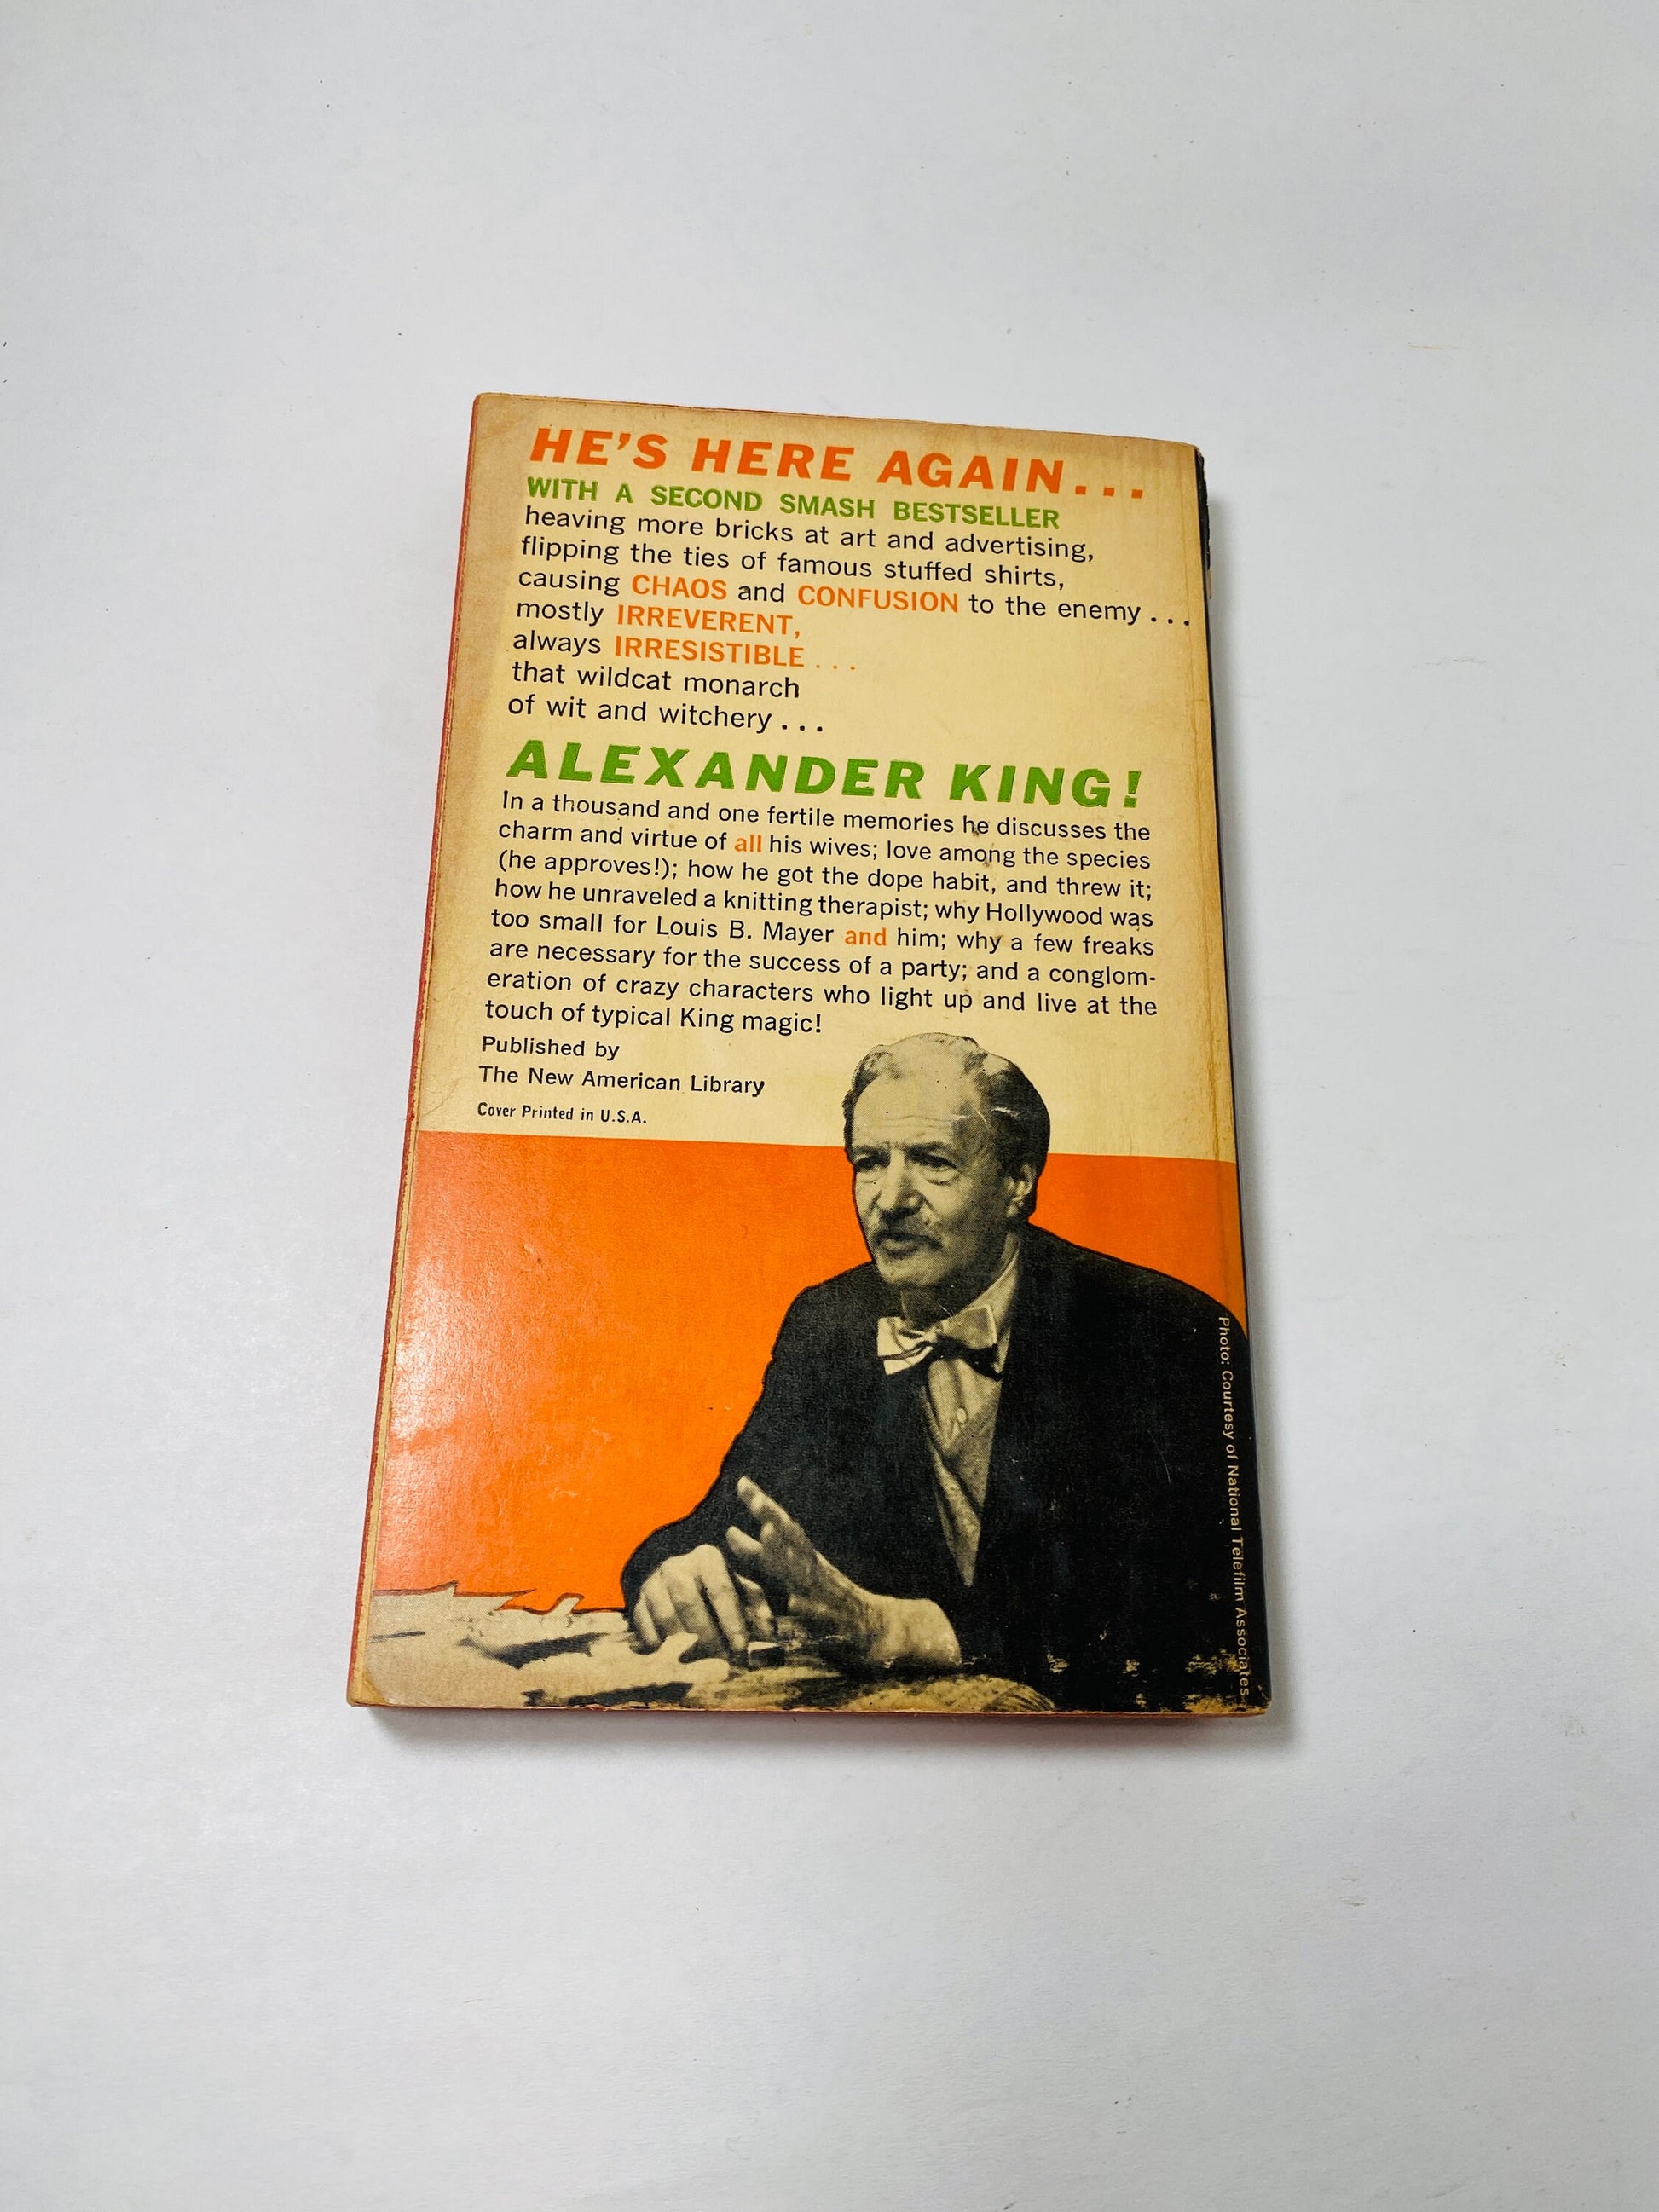 May this house be Free from Tigers vintage FIRST PRINTING paperback book by Alexander King circa 1961 1960s best selling novel